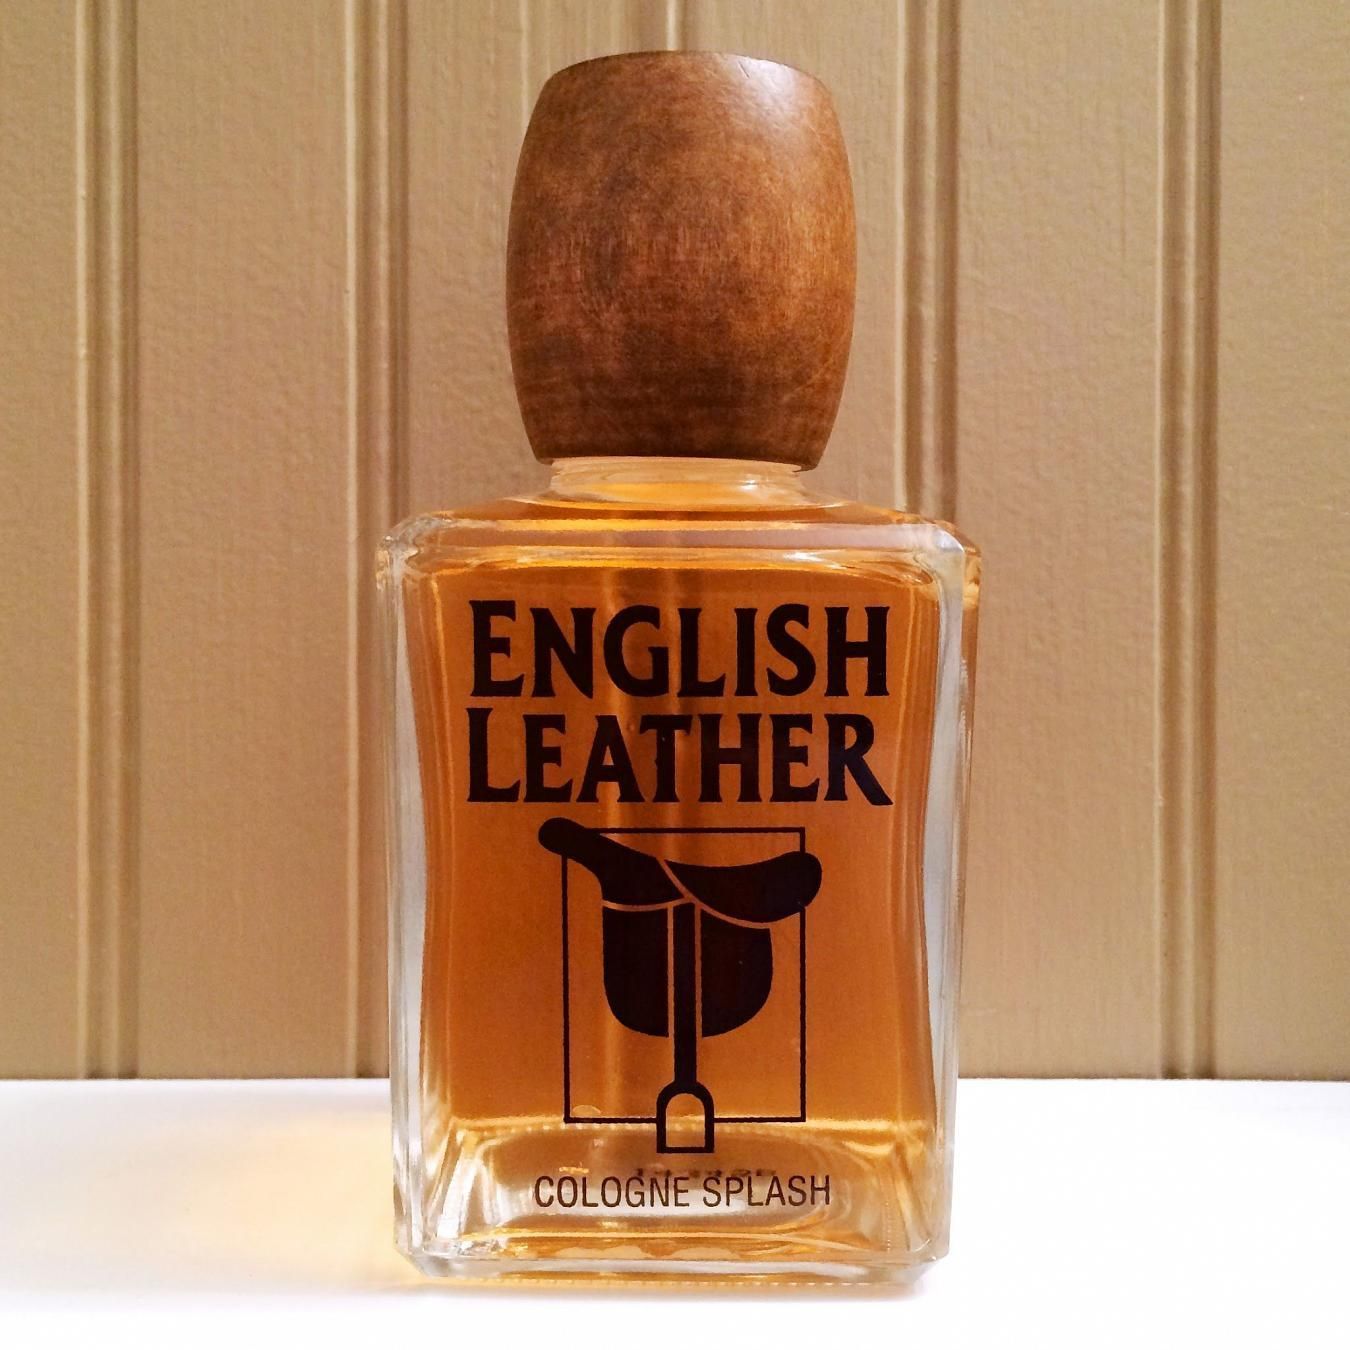 English Leather - First Impression | Daily Lather